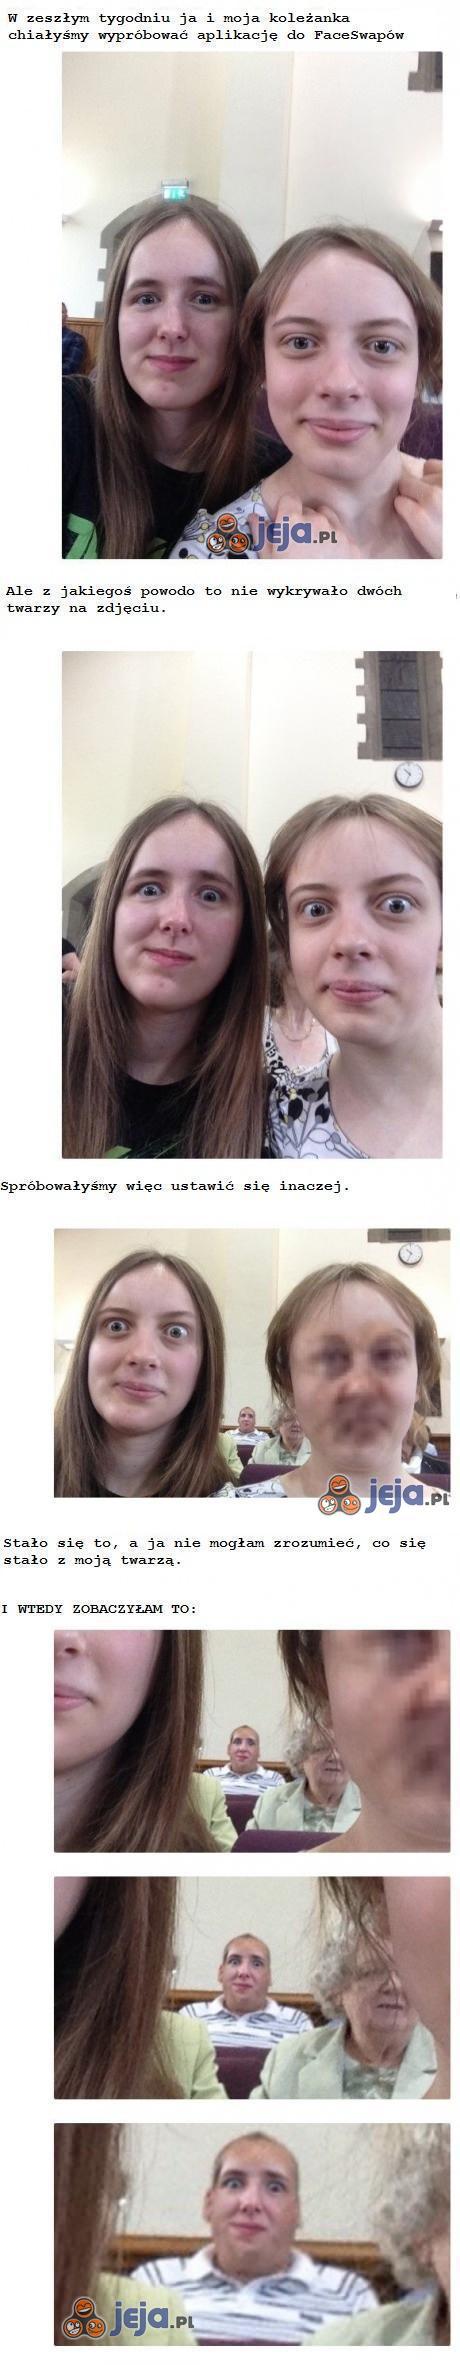 Ach te faceswapy...